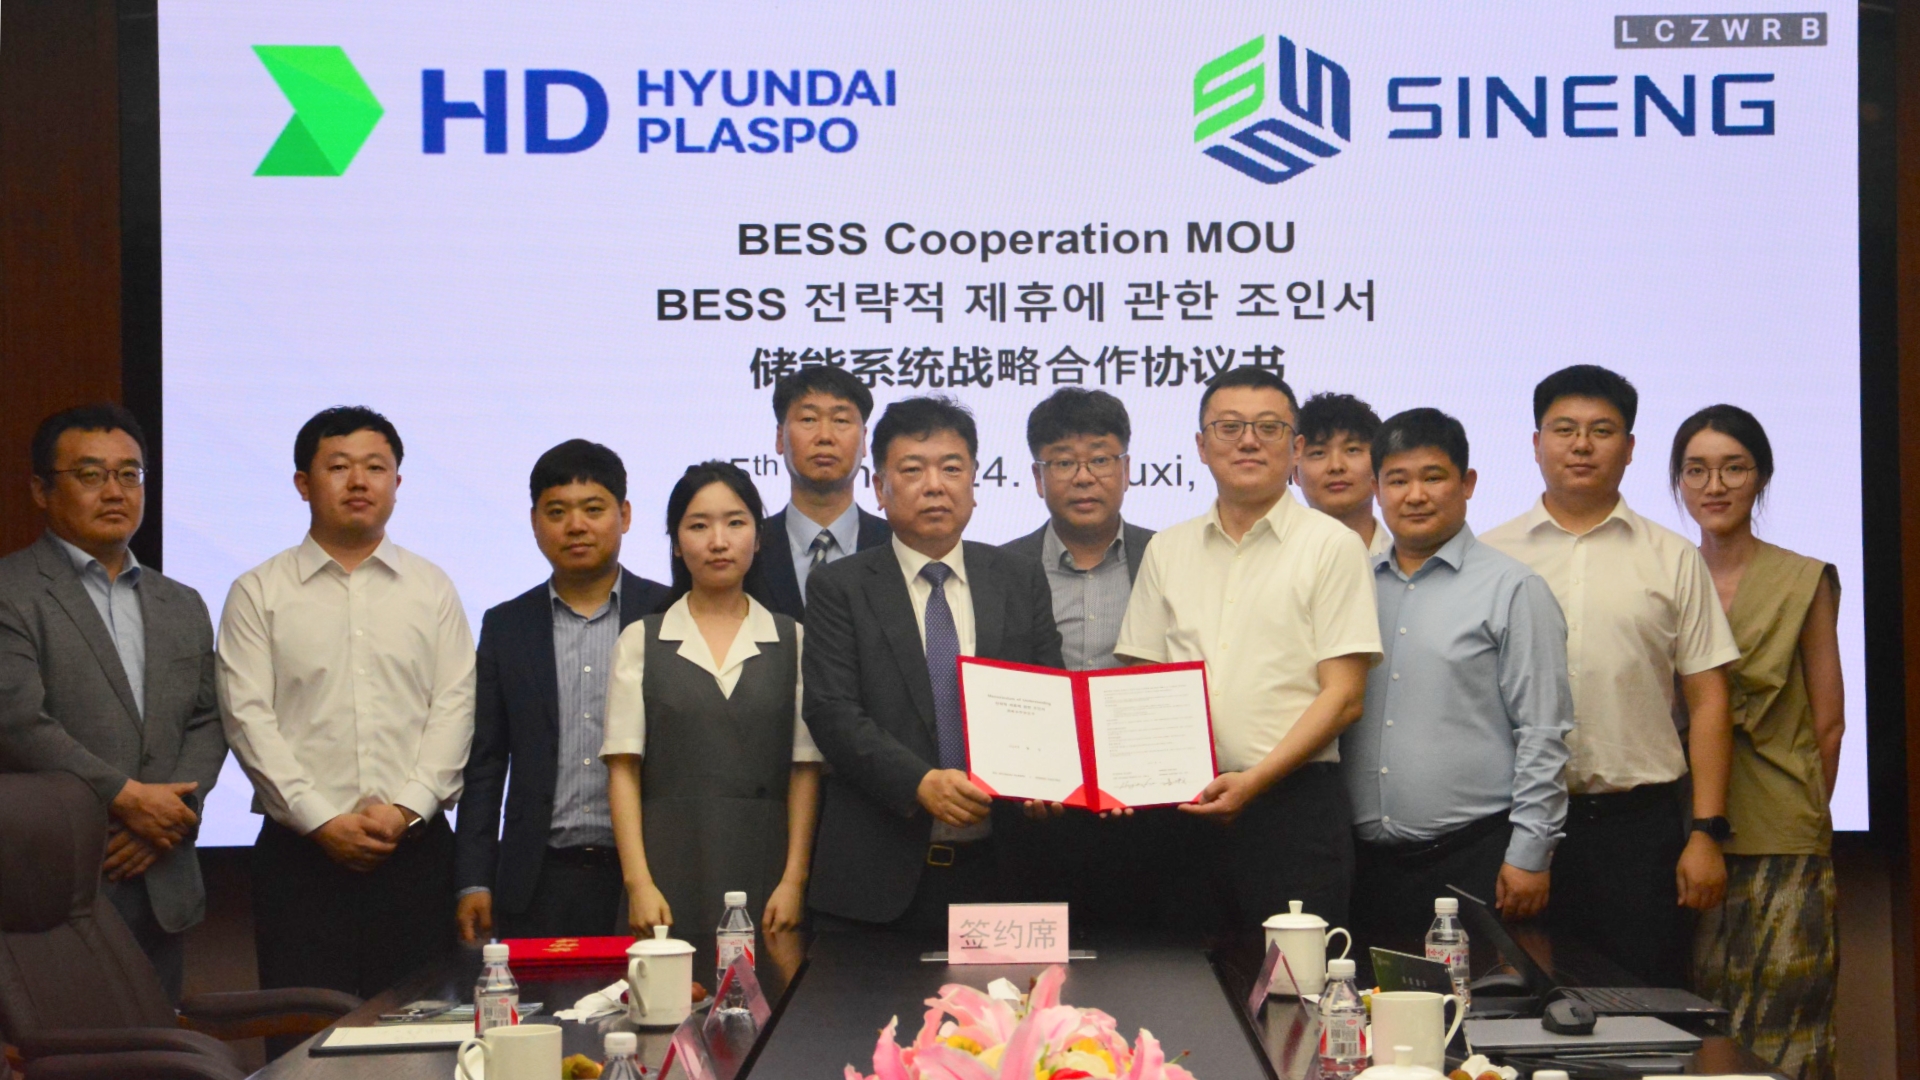 Sineng Electric and HD Hyundai Plaspo Sign MOU to Collaborate on Energy Storage Solutions – EQ